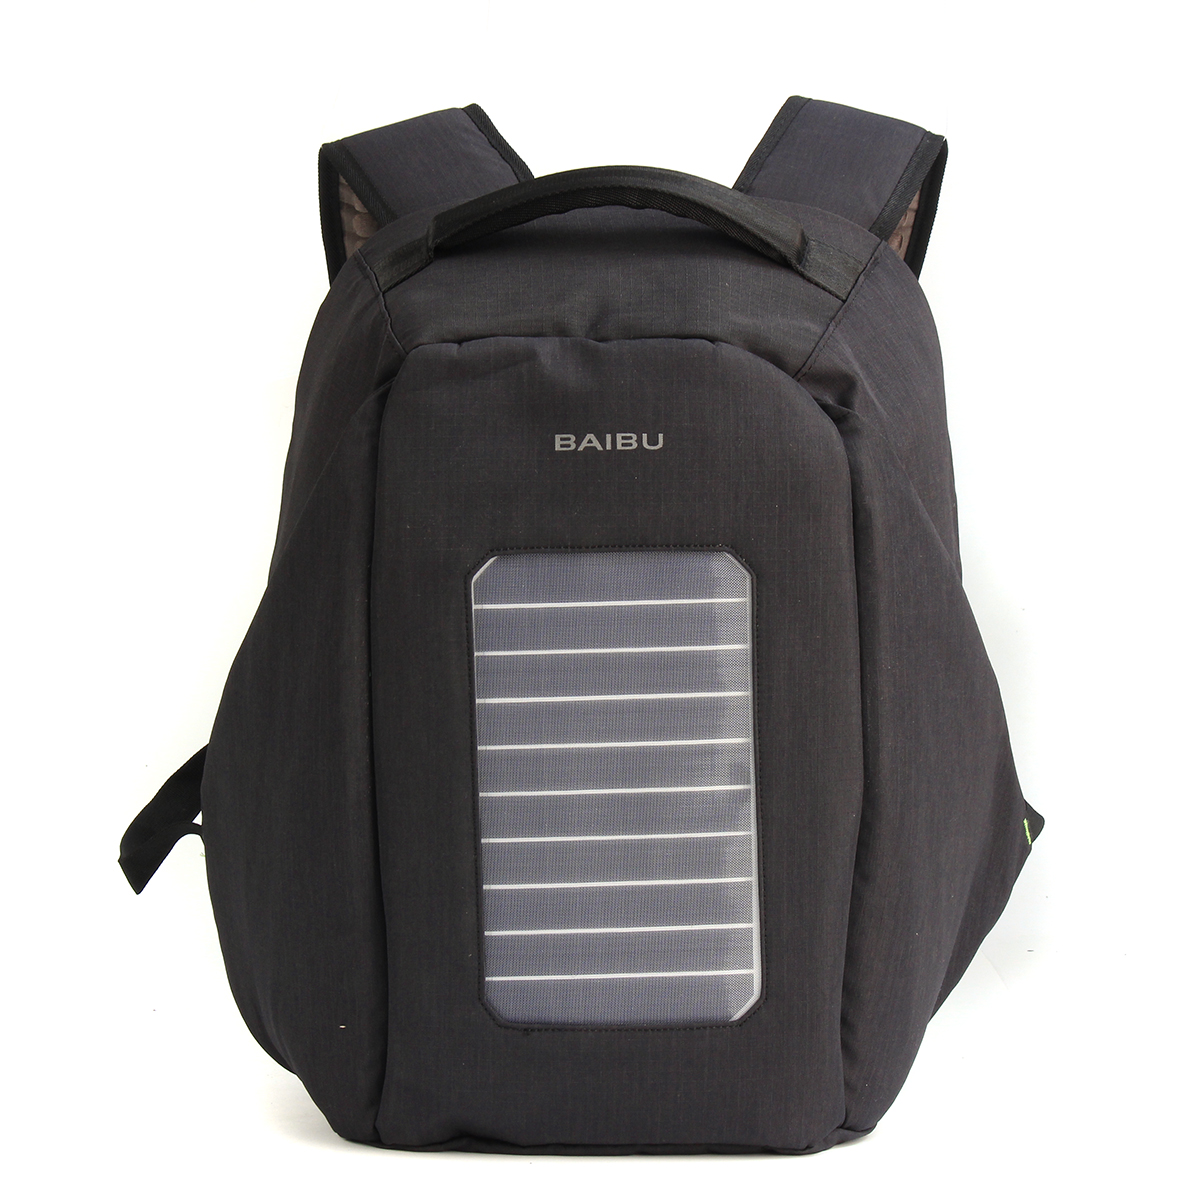 16-inch-Waterproof-Solar-Panel-Backpack-Laptop-USB-Charger-Outdoor-Travel-Camping-Bags-1244084-7